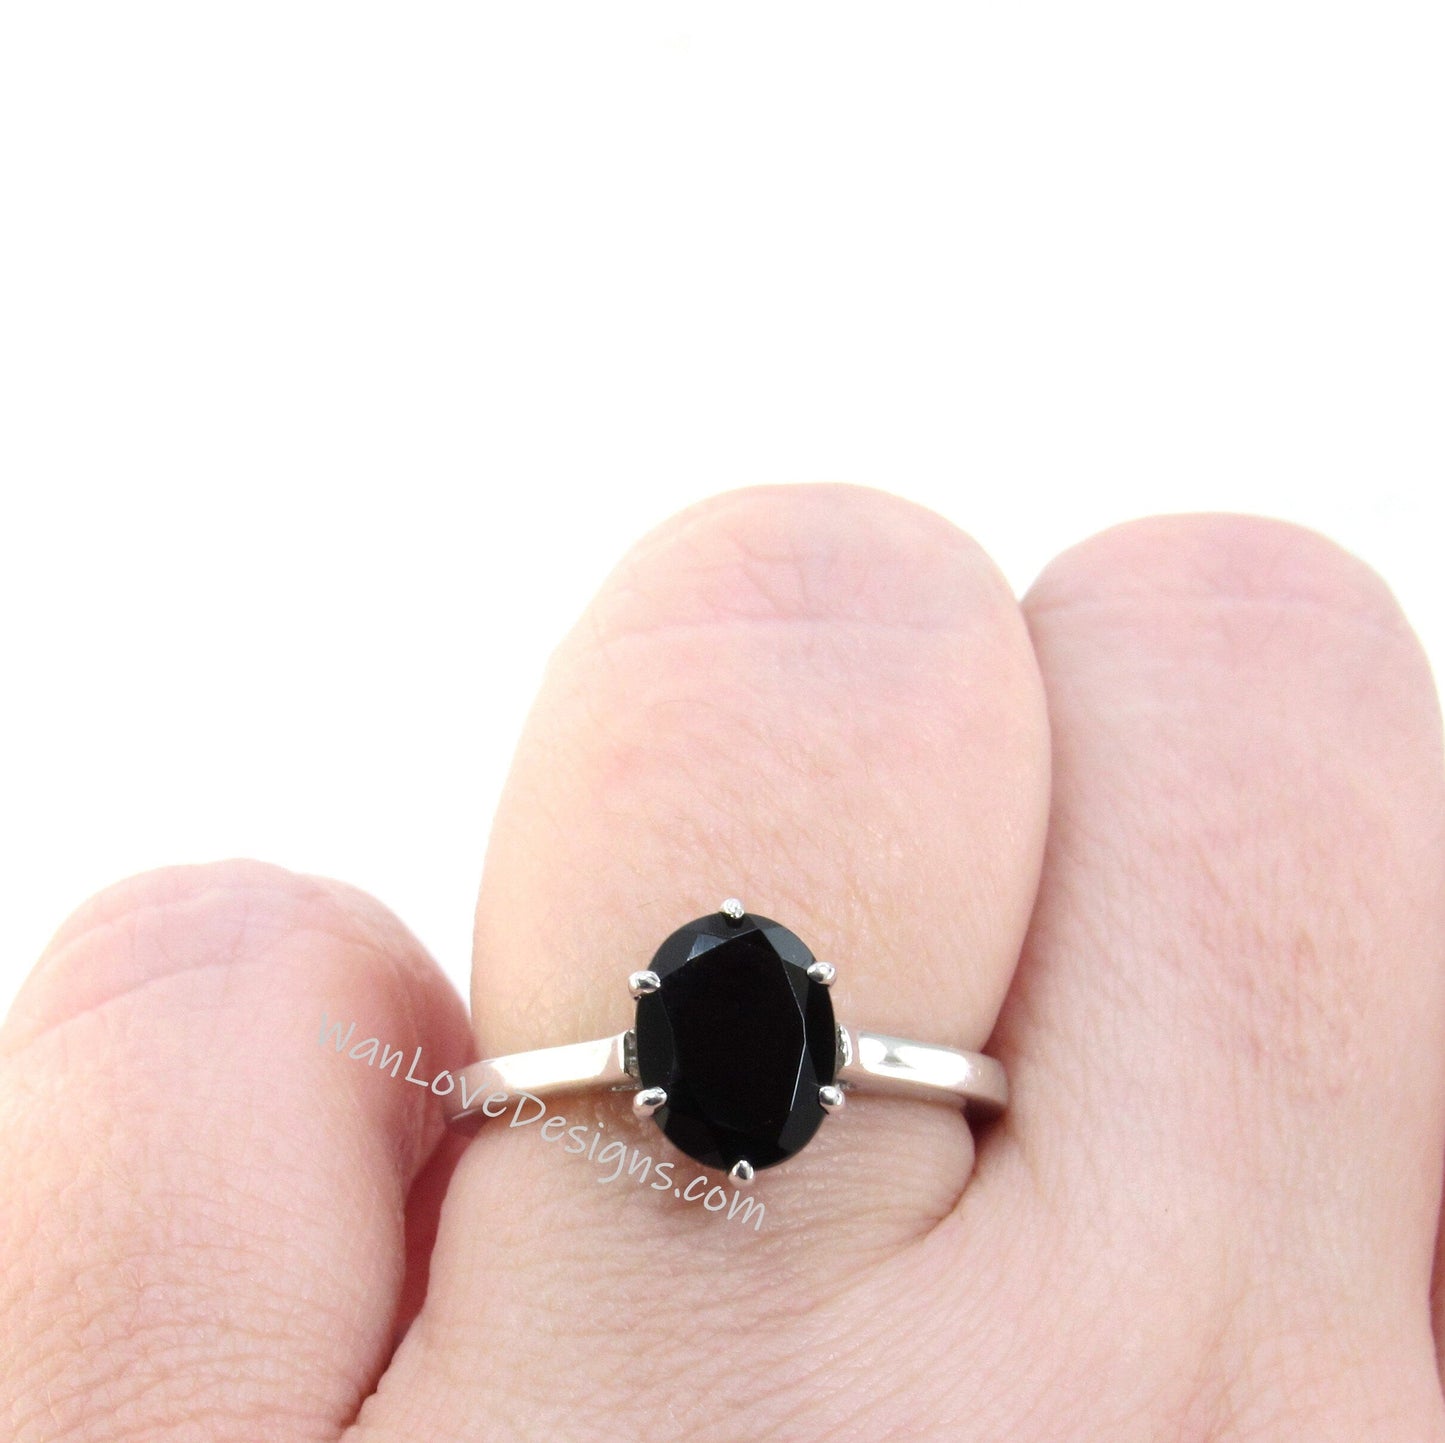 3ct 6 Prong Solitaire Ring, Oval Engagement Ring, Black Spinel Trellis Ring, Stacking Wedding Ring, Anniversary Ring, Ready to Ship Wan Love Designs